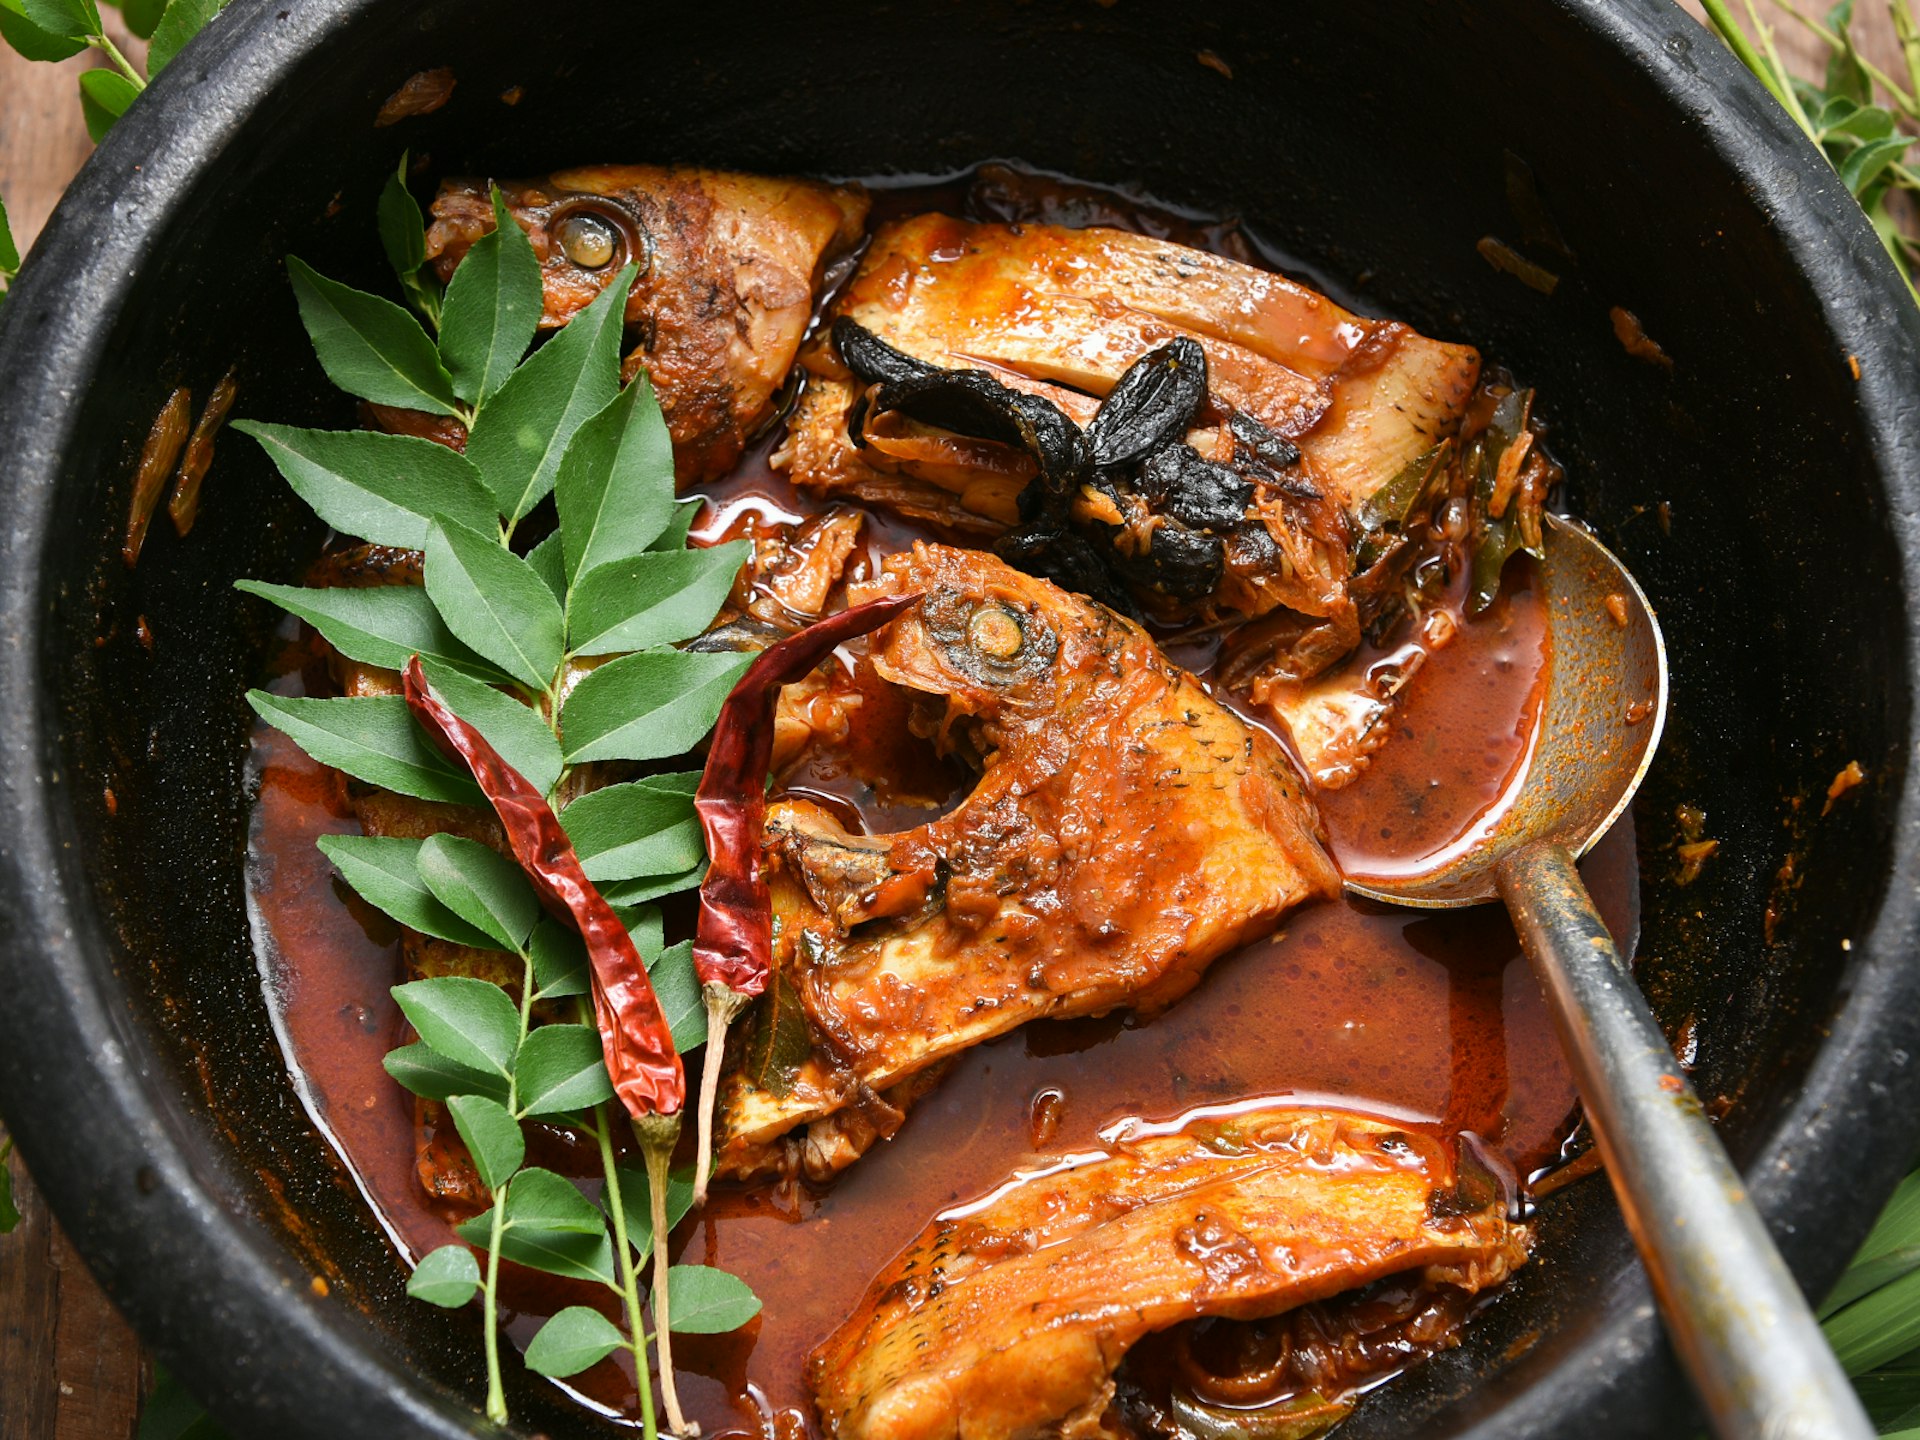 A spicy Kerala fish curry © Santhosh Varghese / Shutterstock